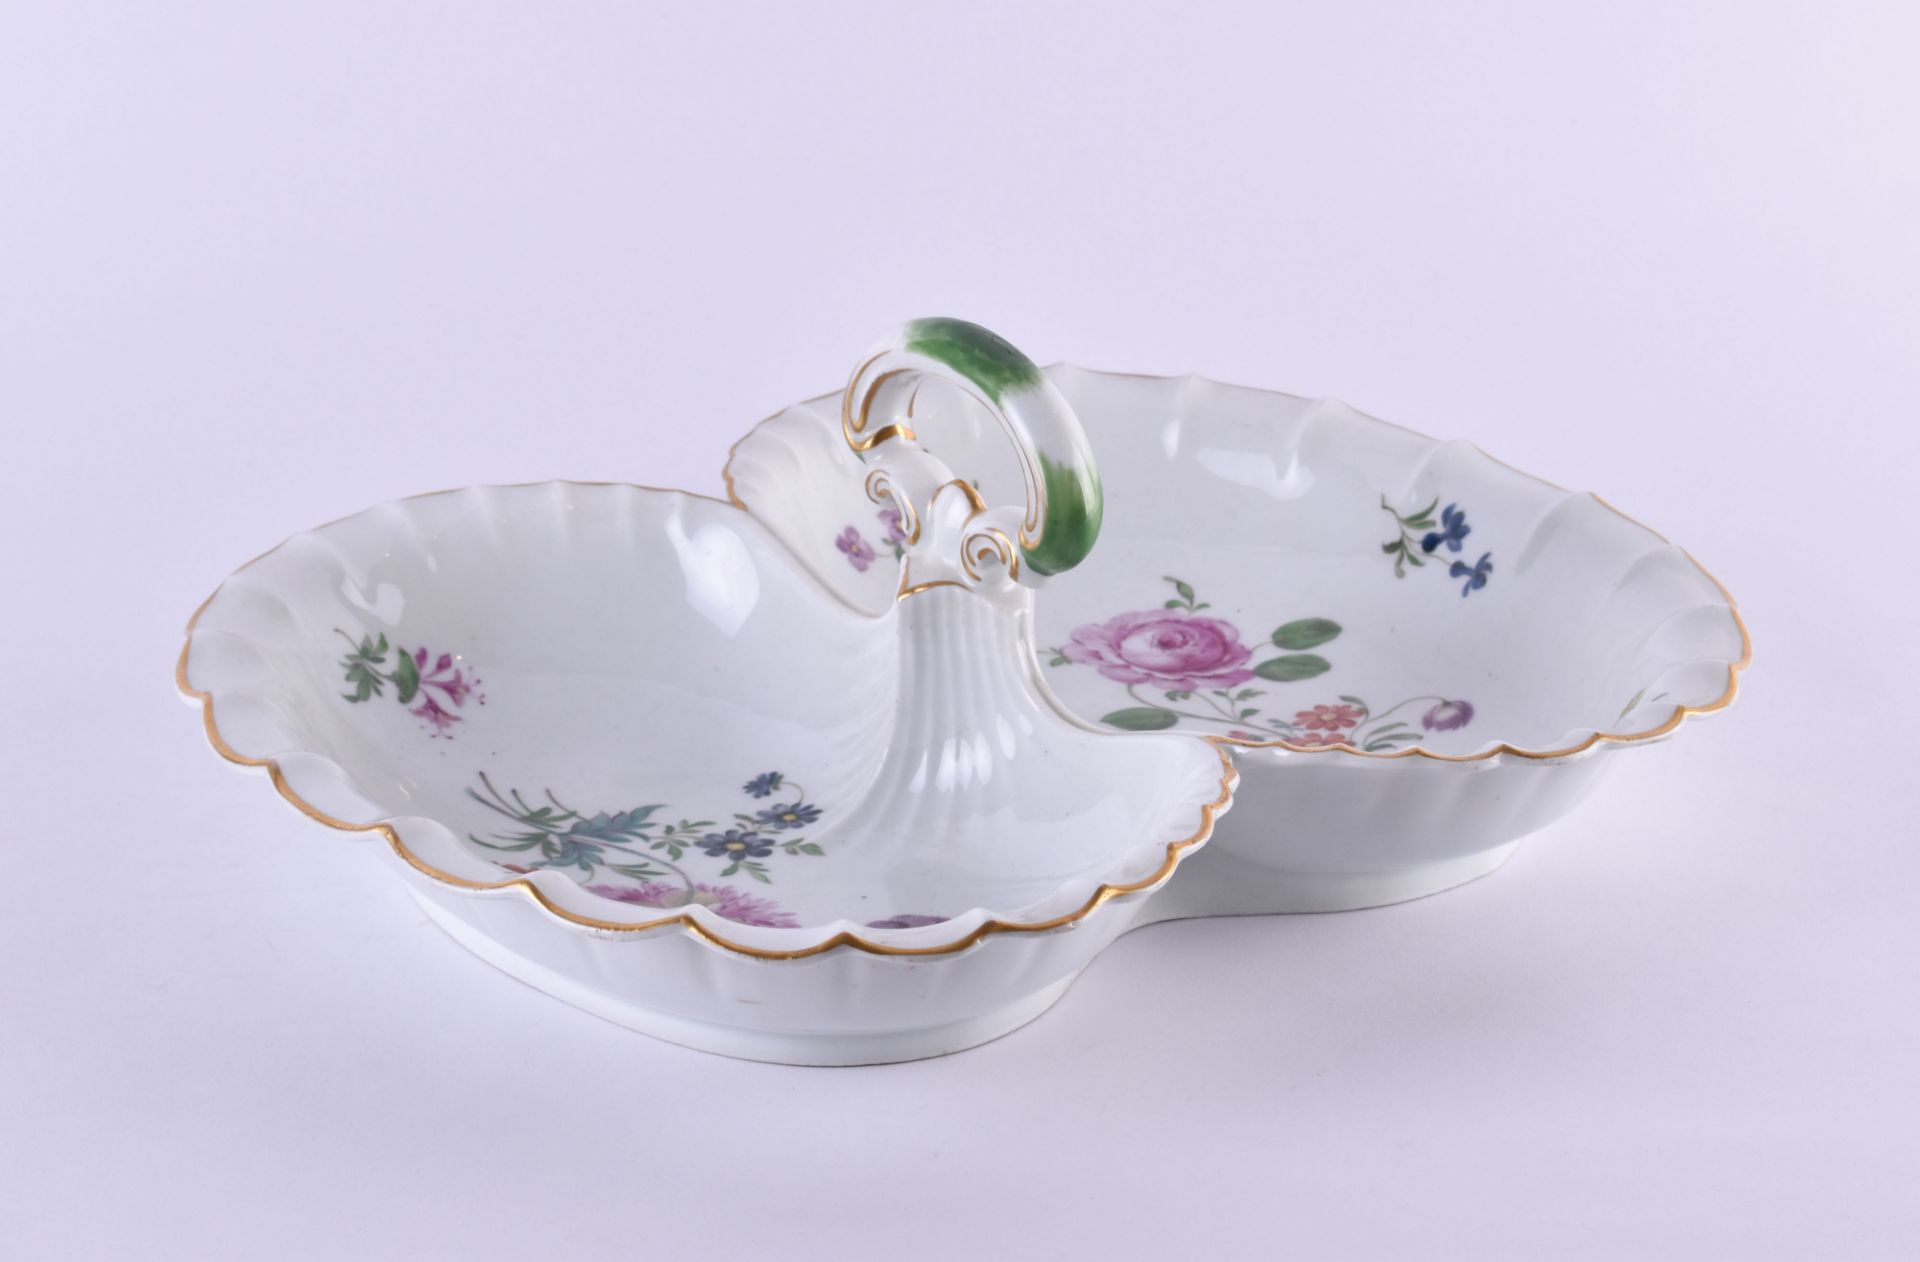 Bowl with handle Meissen 19th century - Image 3 of 5